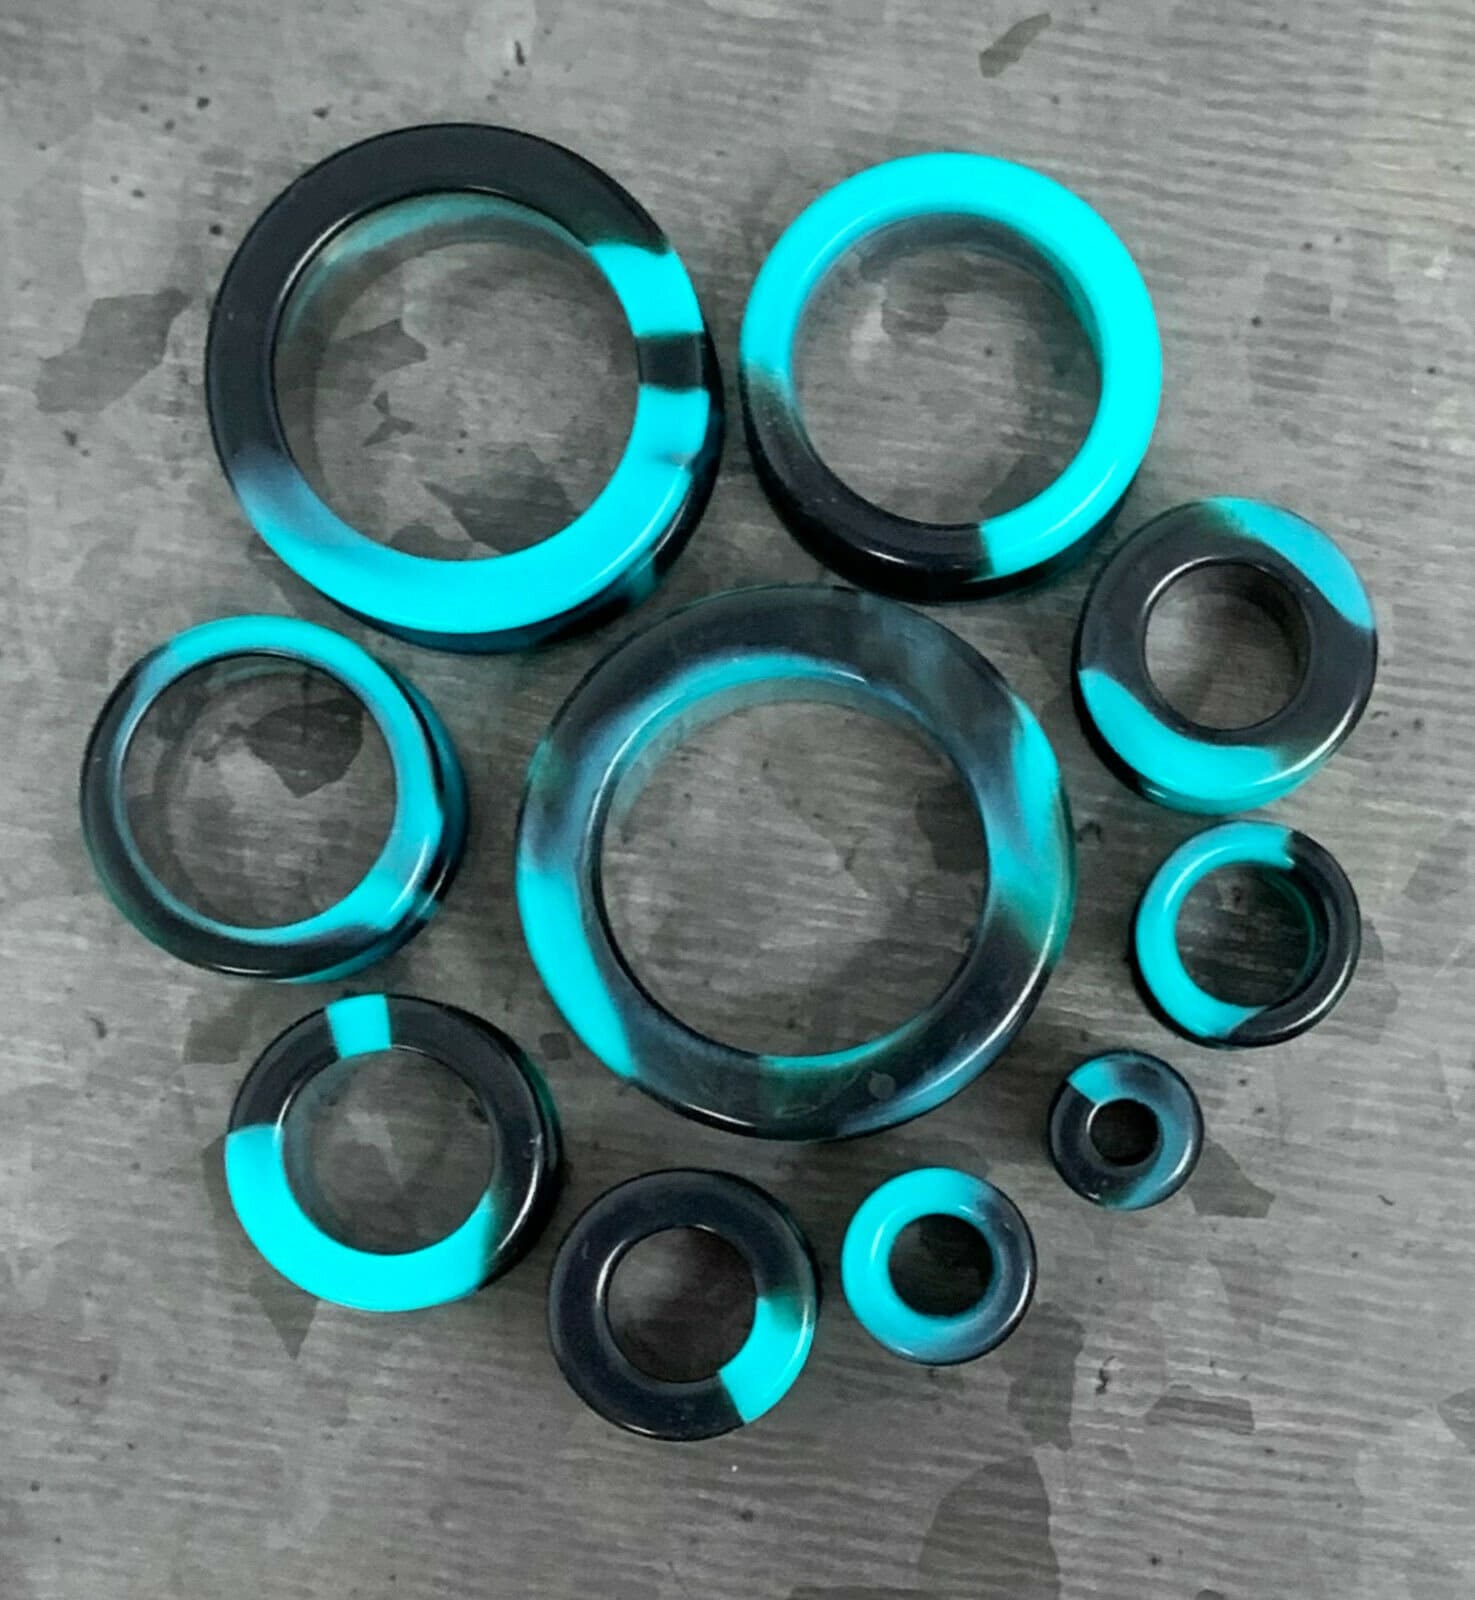 PAIR of Beautiful Teal & Black Swirl Galaxy Silicone Double Flare Tunnel/Plugs - Gauges 2g (6.5mm) up to 2" (50mm) available!